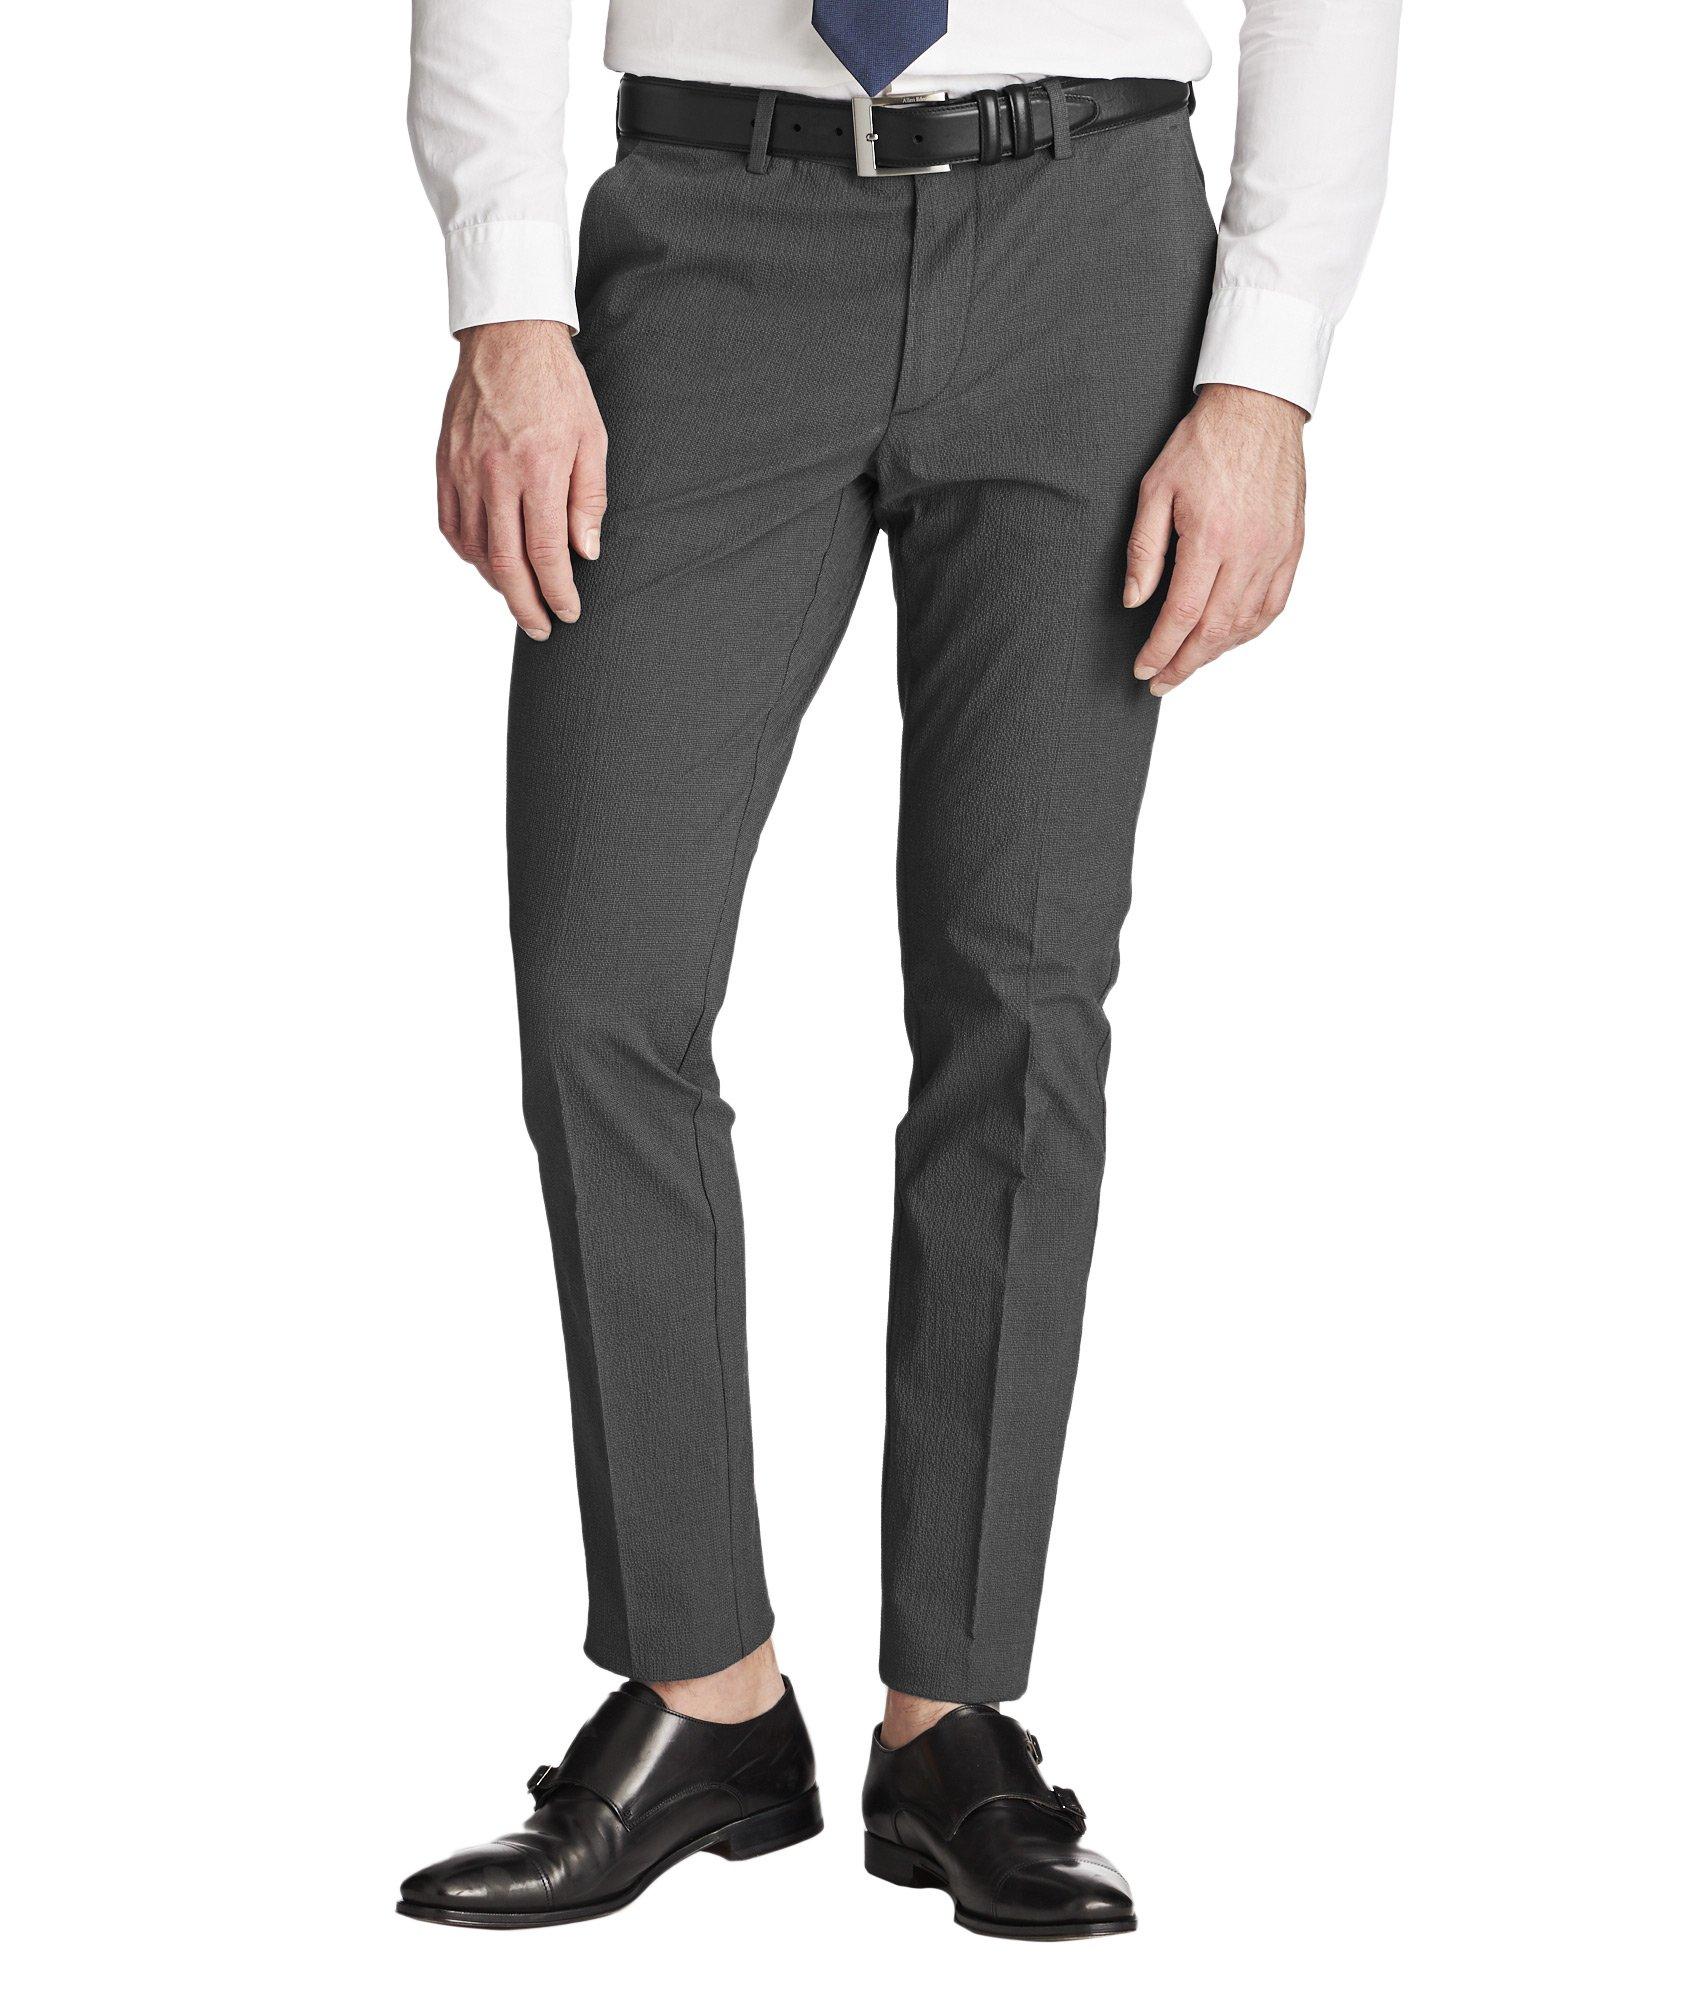 Kaito Slim Fit Stretch-Blend Pants image 0